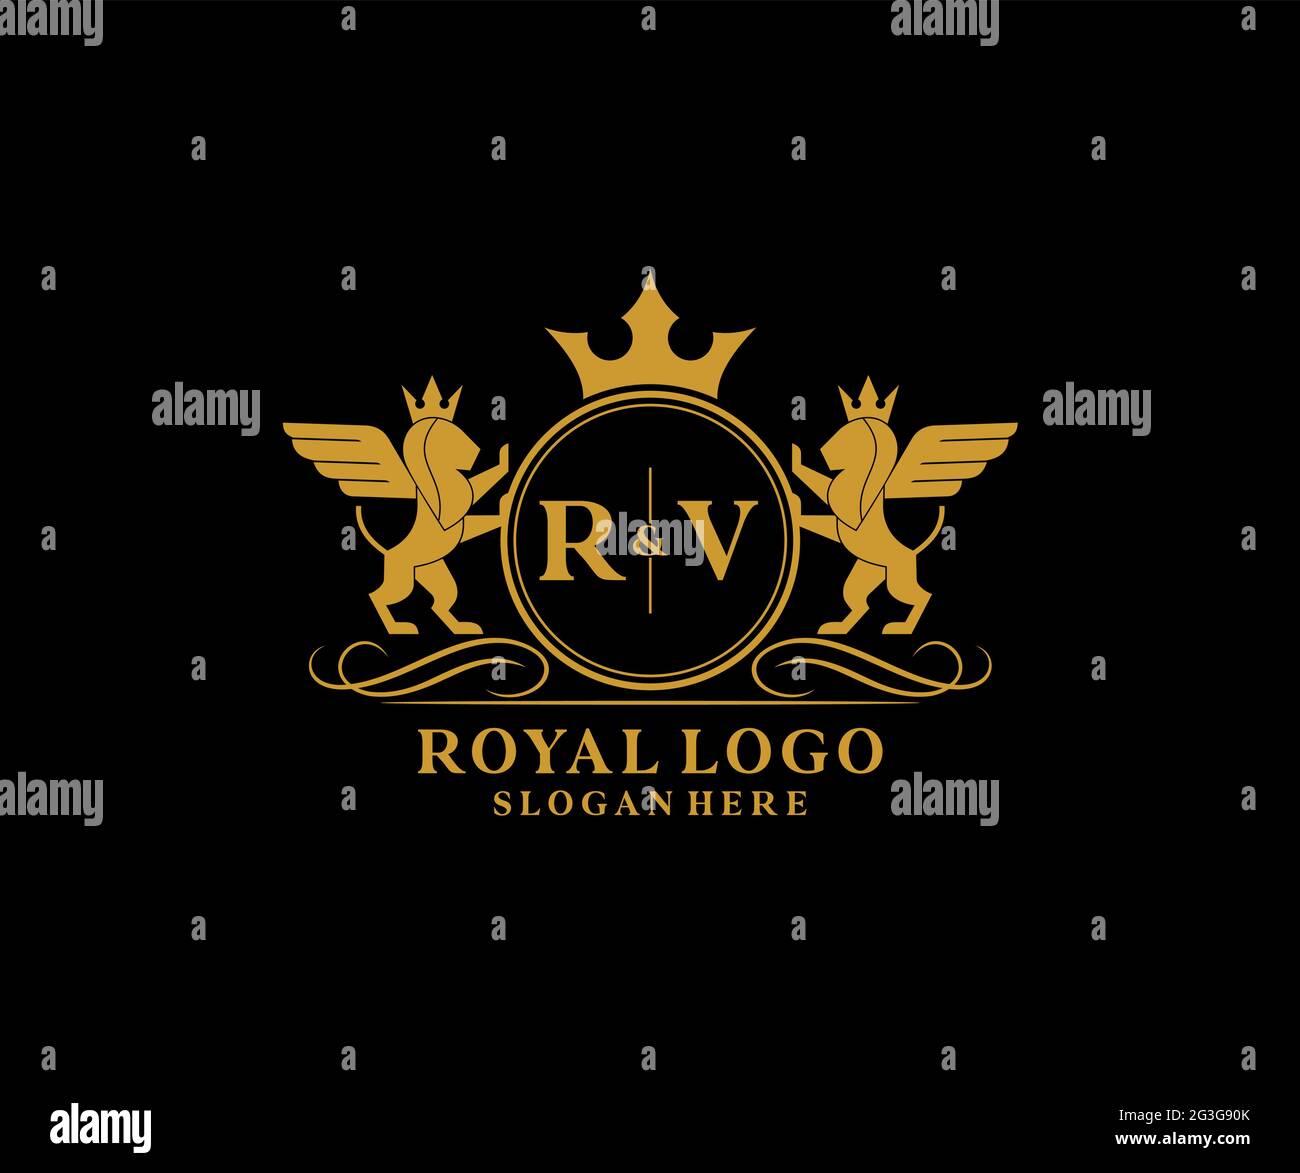 RV Letter Lion Royal Luxury Heraldic,Crest Logo template in vector art for Restaurant, Royalty, Boutique, Cafe, Hotel, Heraldic, Jewelry, Fashion and Stock Vector